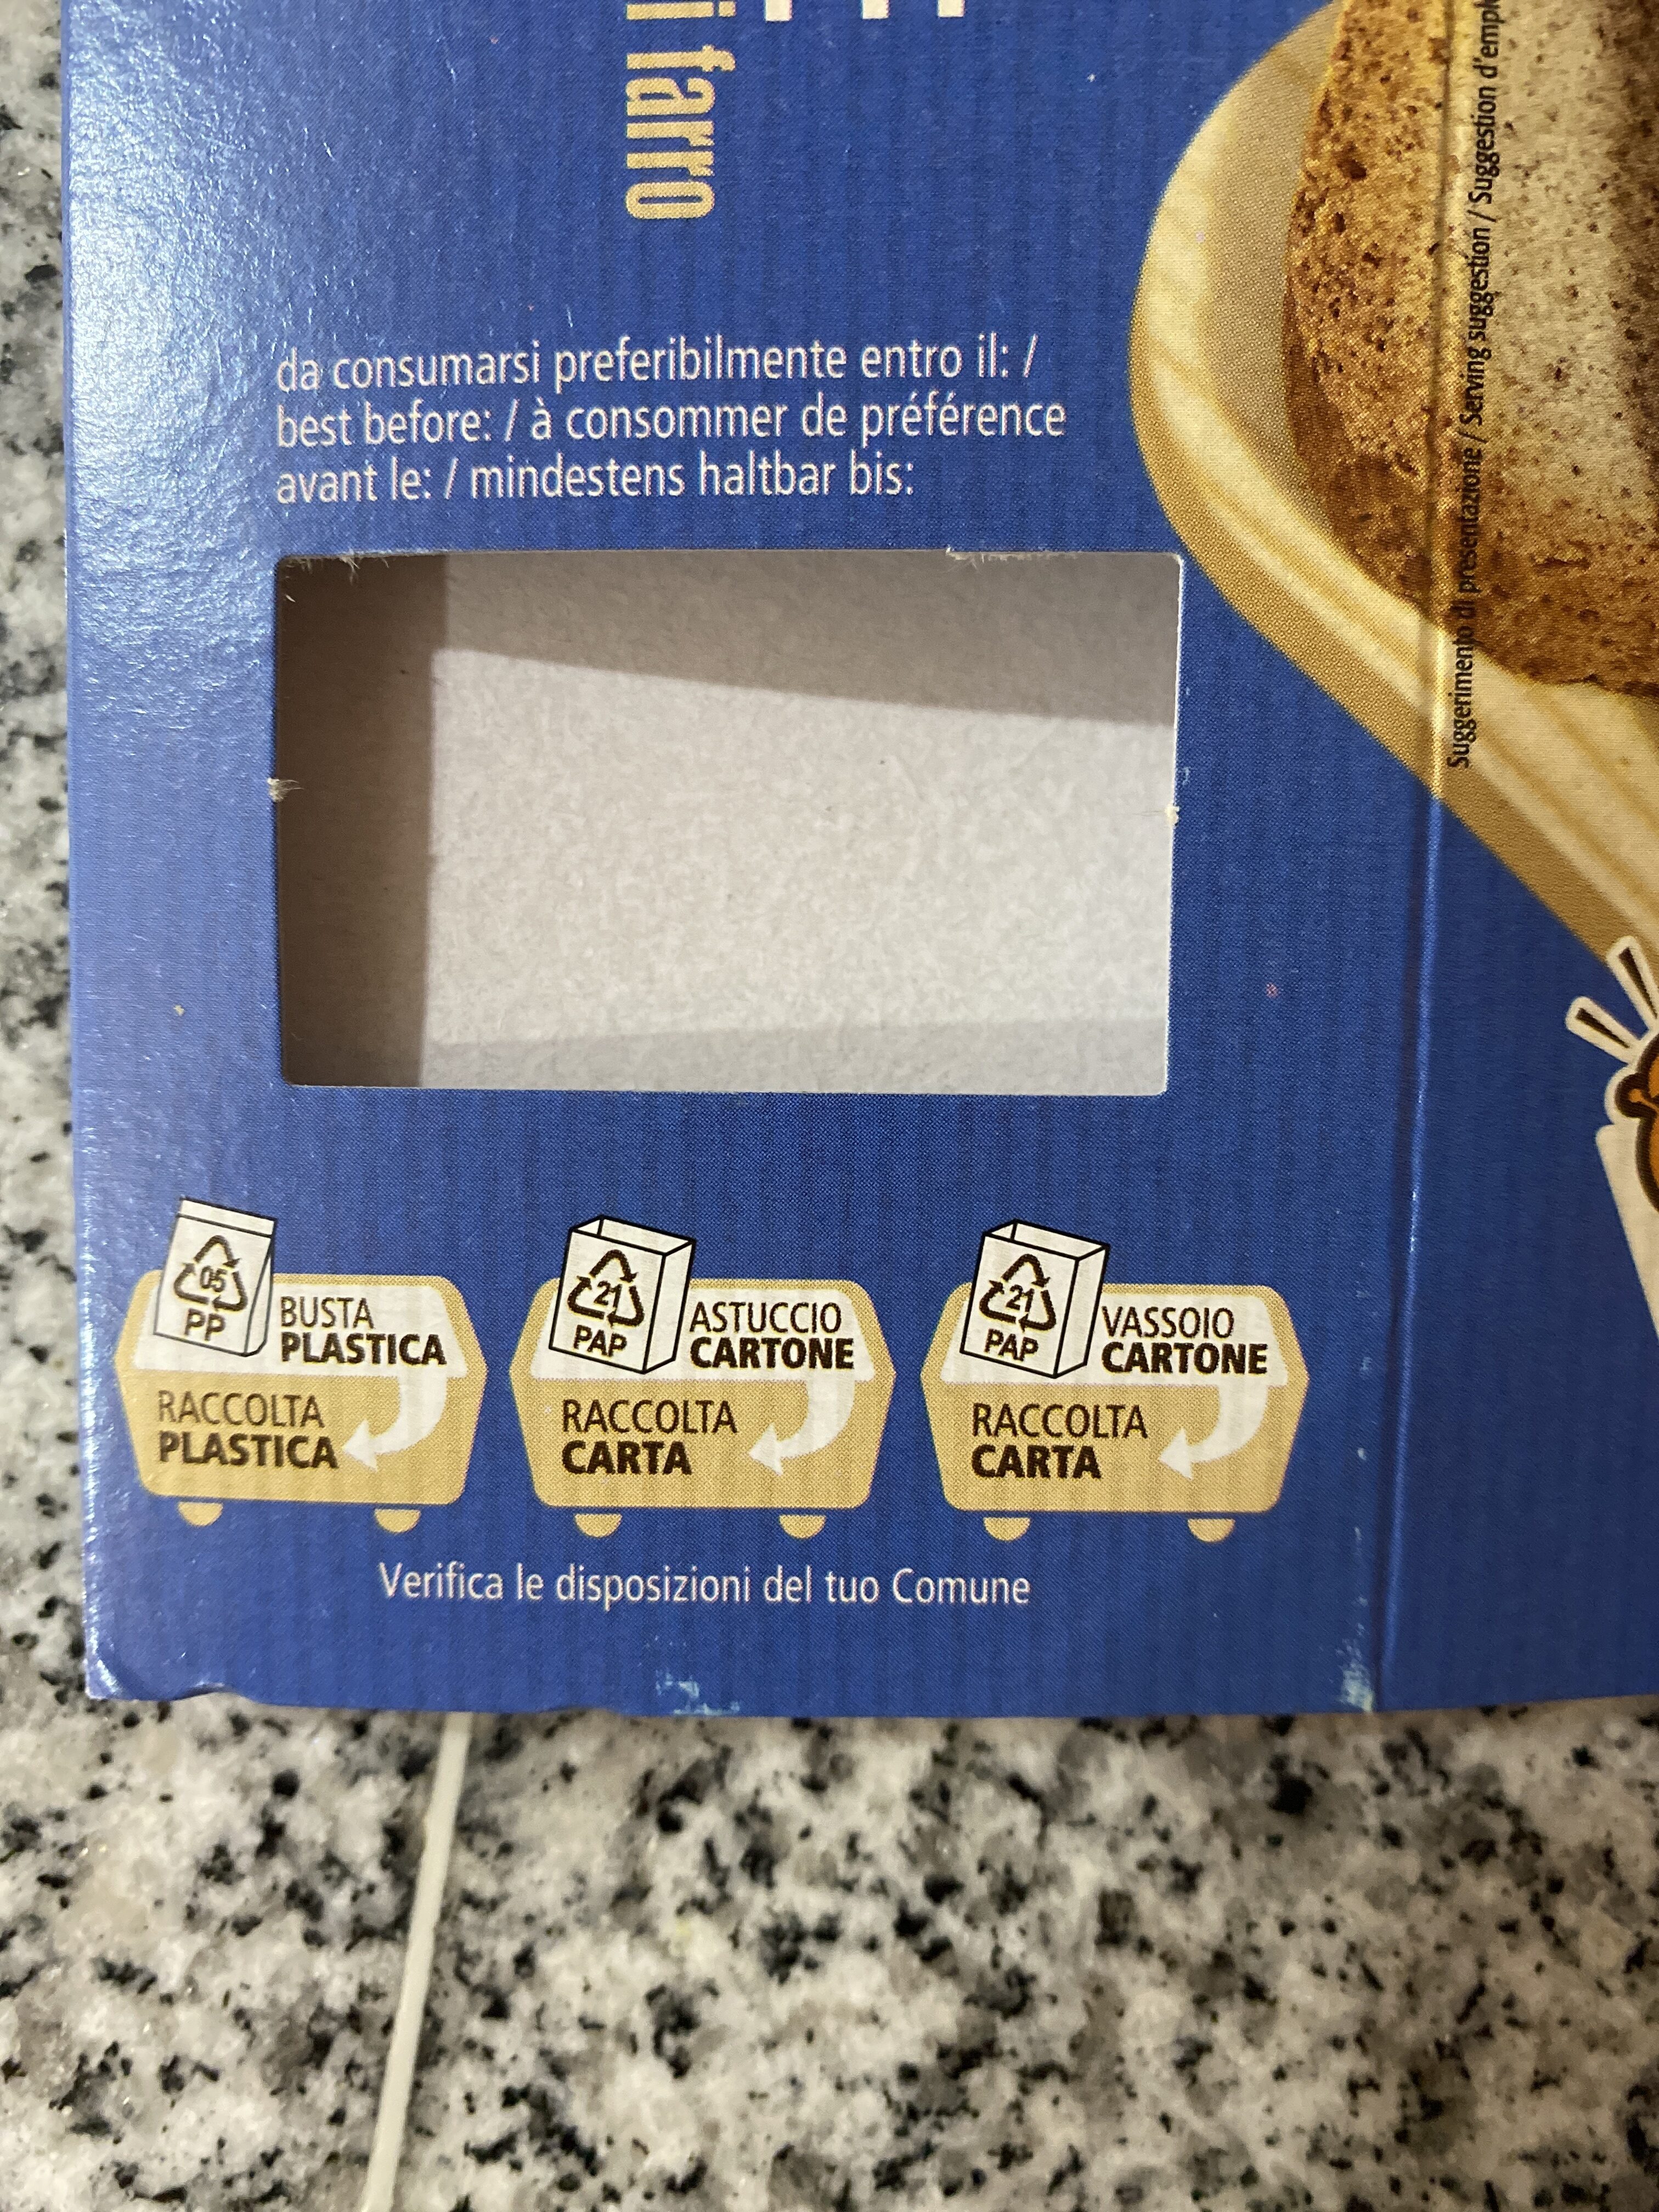 Fette biscottate - farina integrale di farro - Recycling instructions and/or packaging information - it